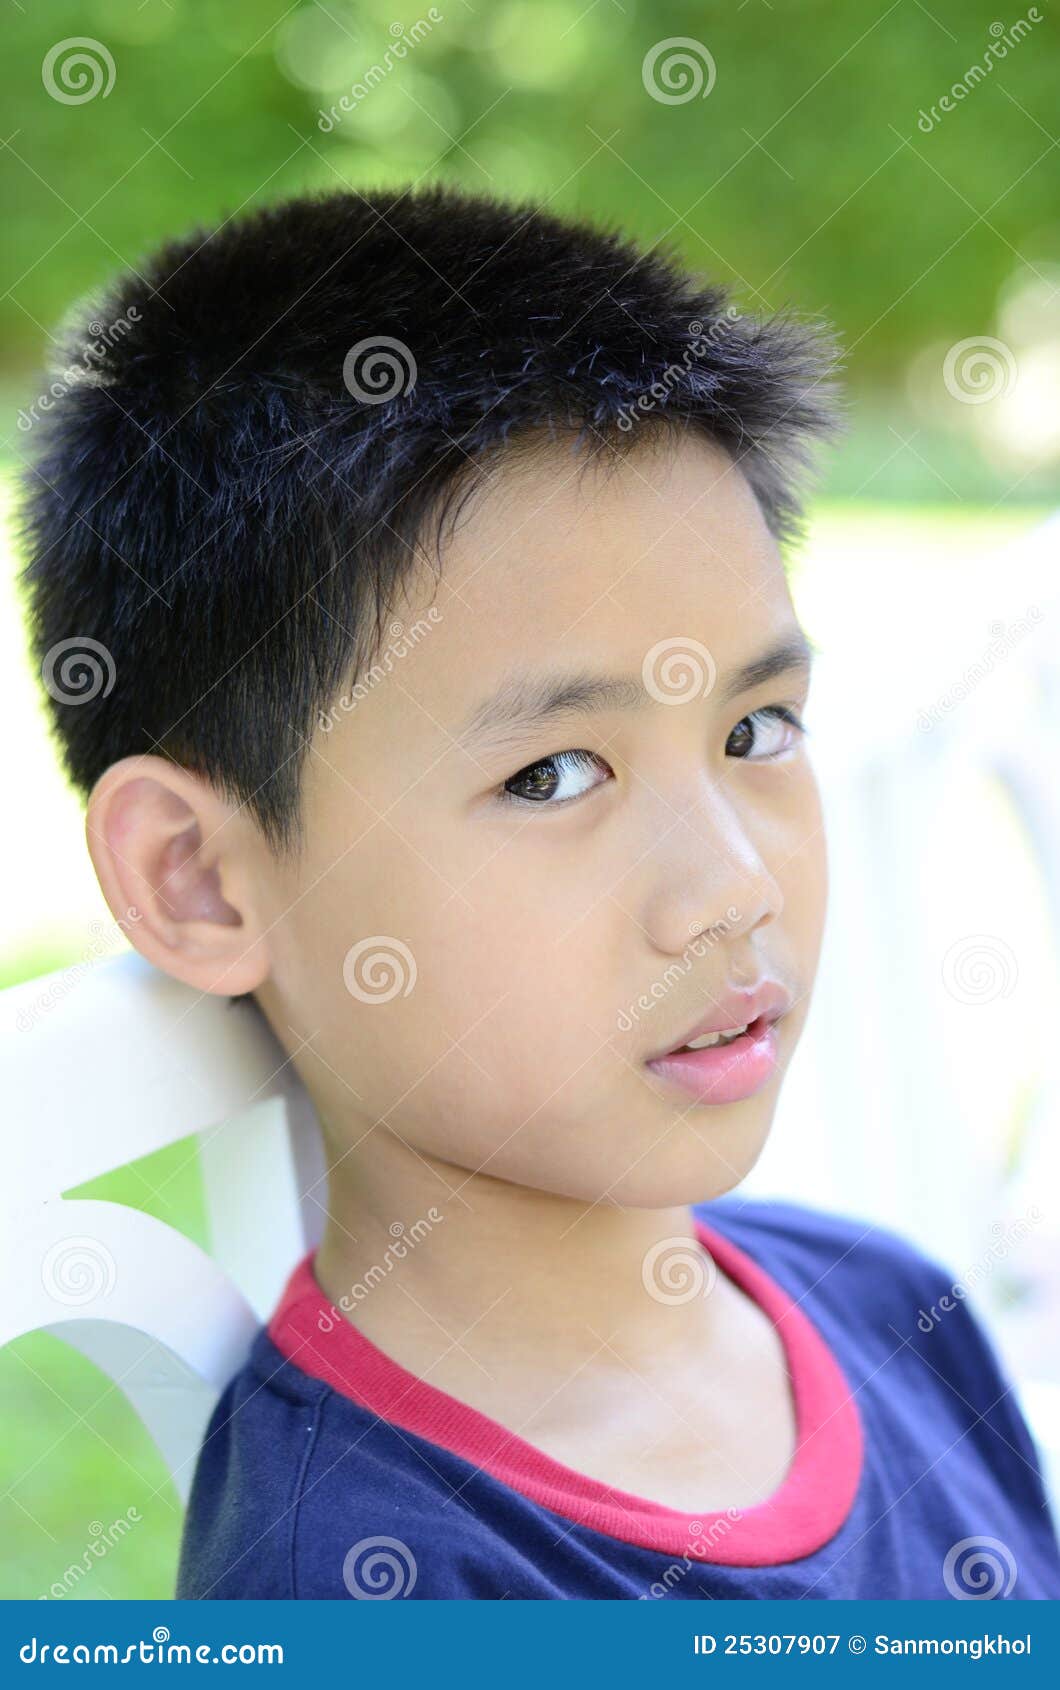 Close Up Demeanor Of Thai Boy. Stock Image - Image of 